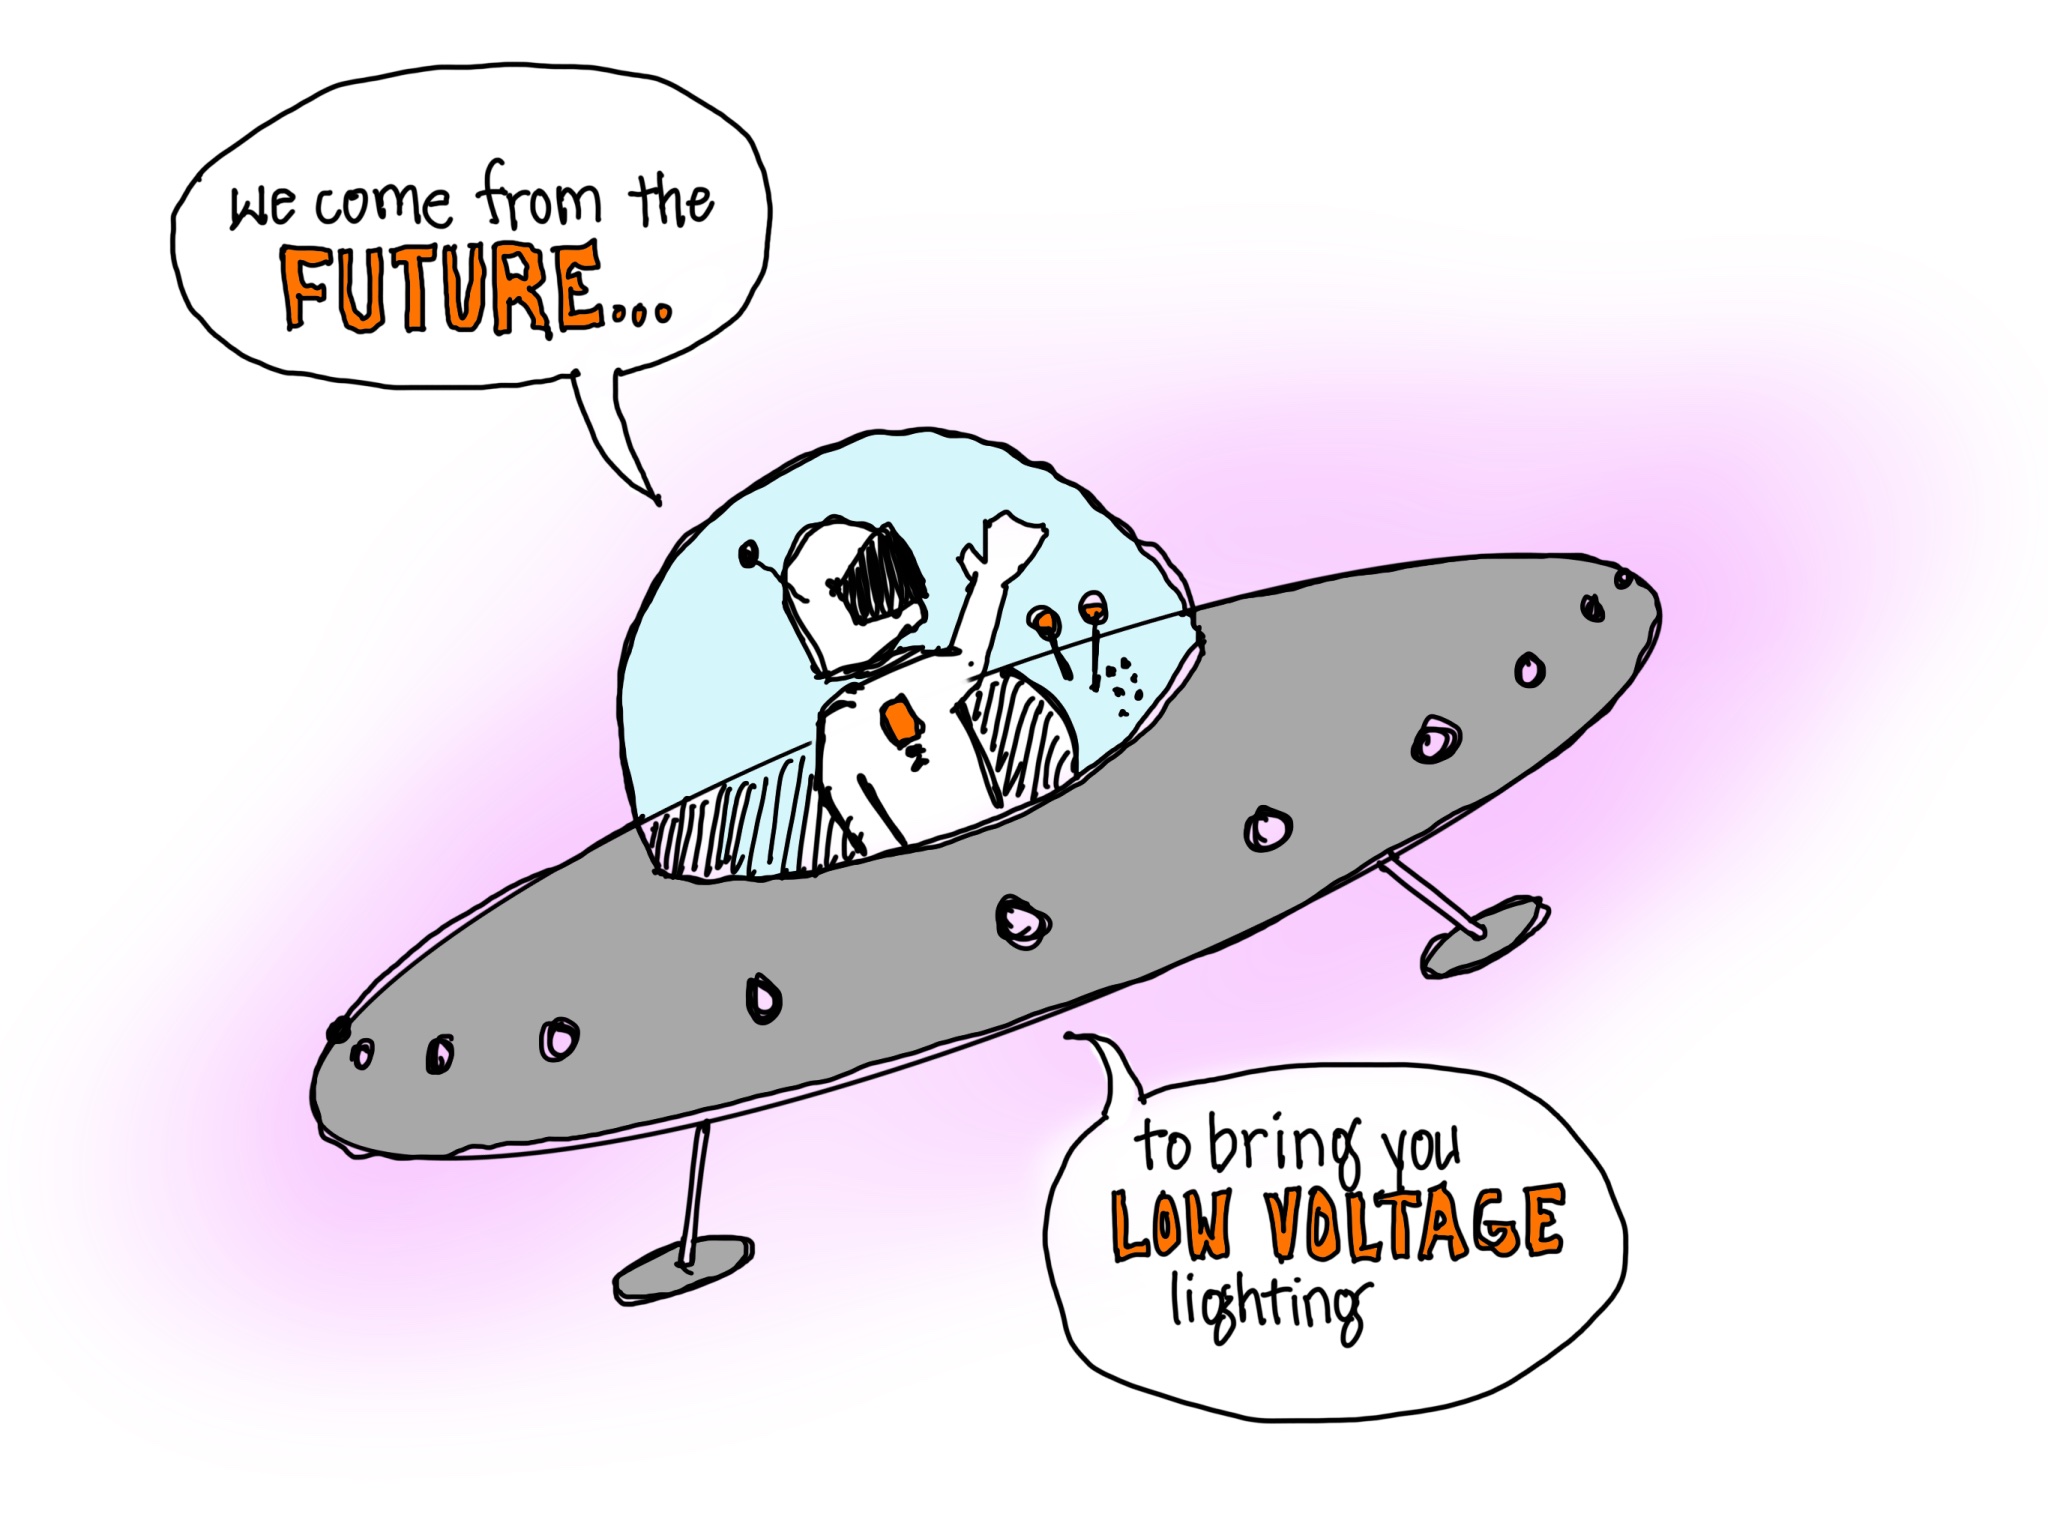 An illustration of an astronaut in a flying saucer with a glass dome. The top speech bubble reads "We come from the FUTURE..." and the bottom bubble reads "to bring you LOW VOLTAGE lighting." The words FUTURE and LOW VOLTAGE are bold and red. The astronaut looks very friendly.